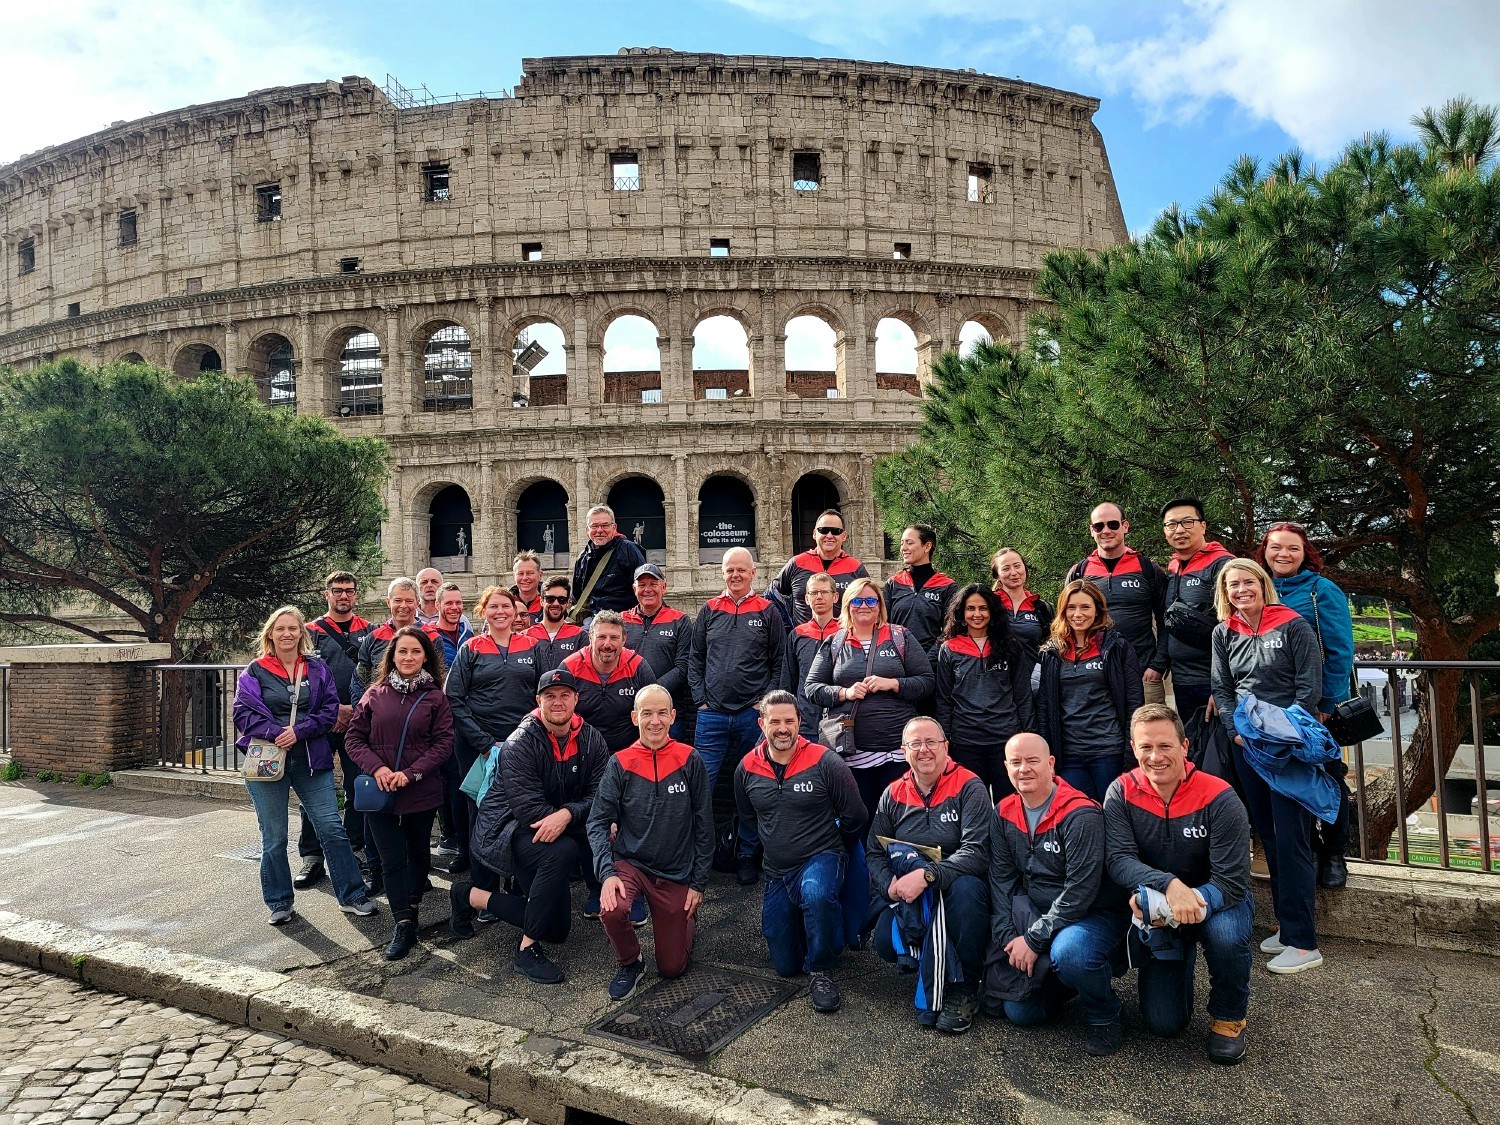 The company wide (USA and Ireland) meeting in Rome, Italy, was a winning event for us all in 2022.